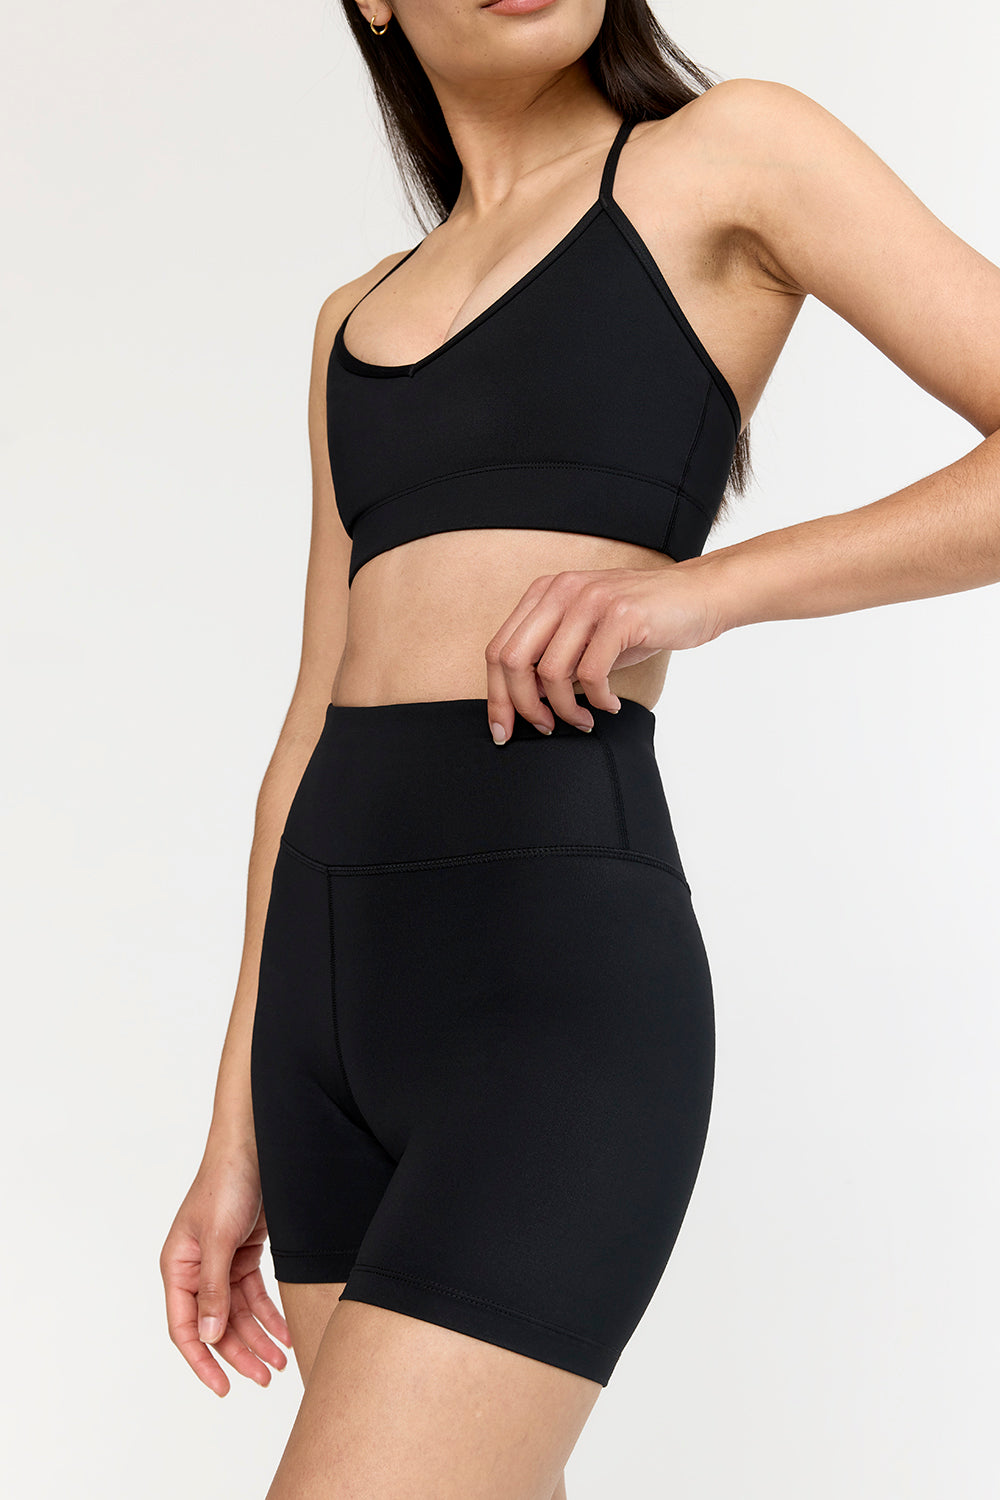 Souluxe Black Essential Sports Cycling Shorts